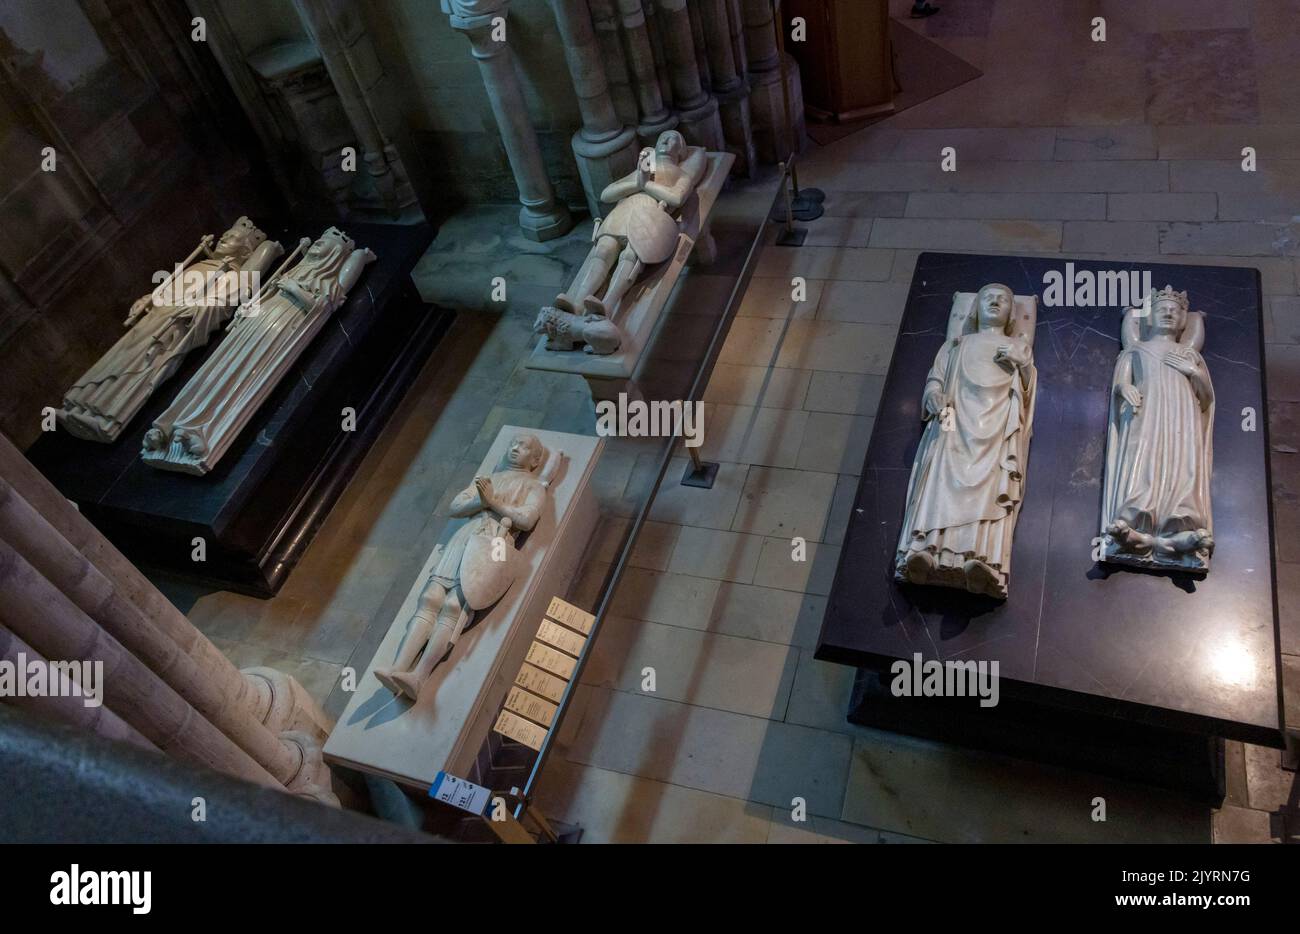 tombs of medieval kings and queens, Saint-Denis basilica, Paris, France Stock Photo